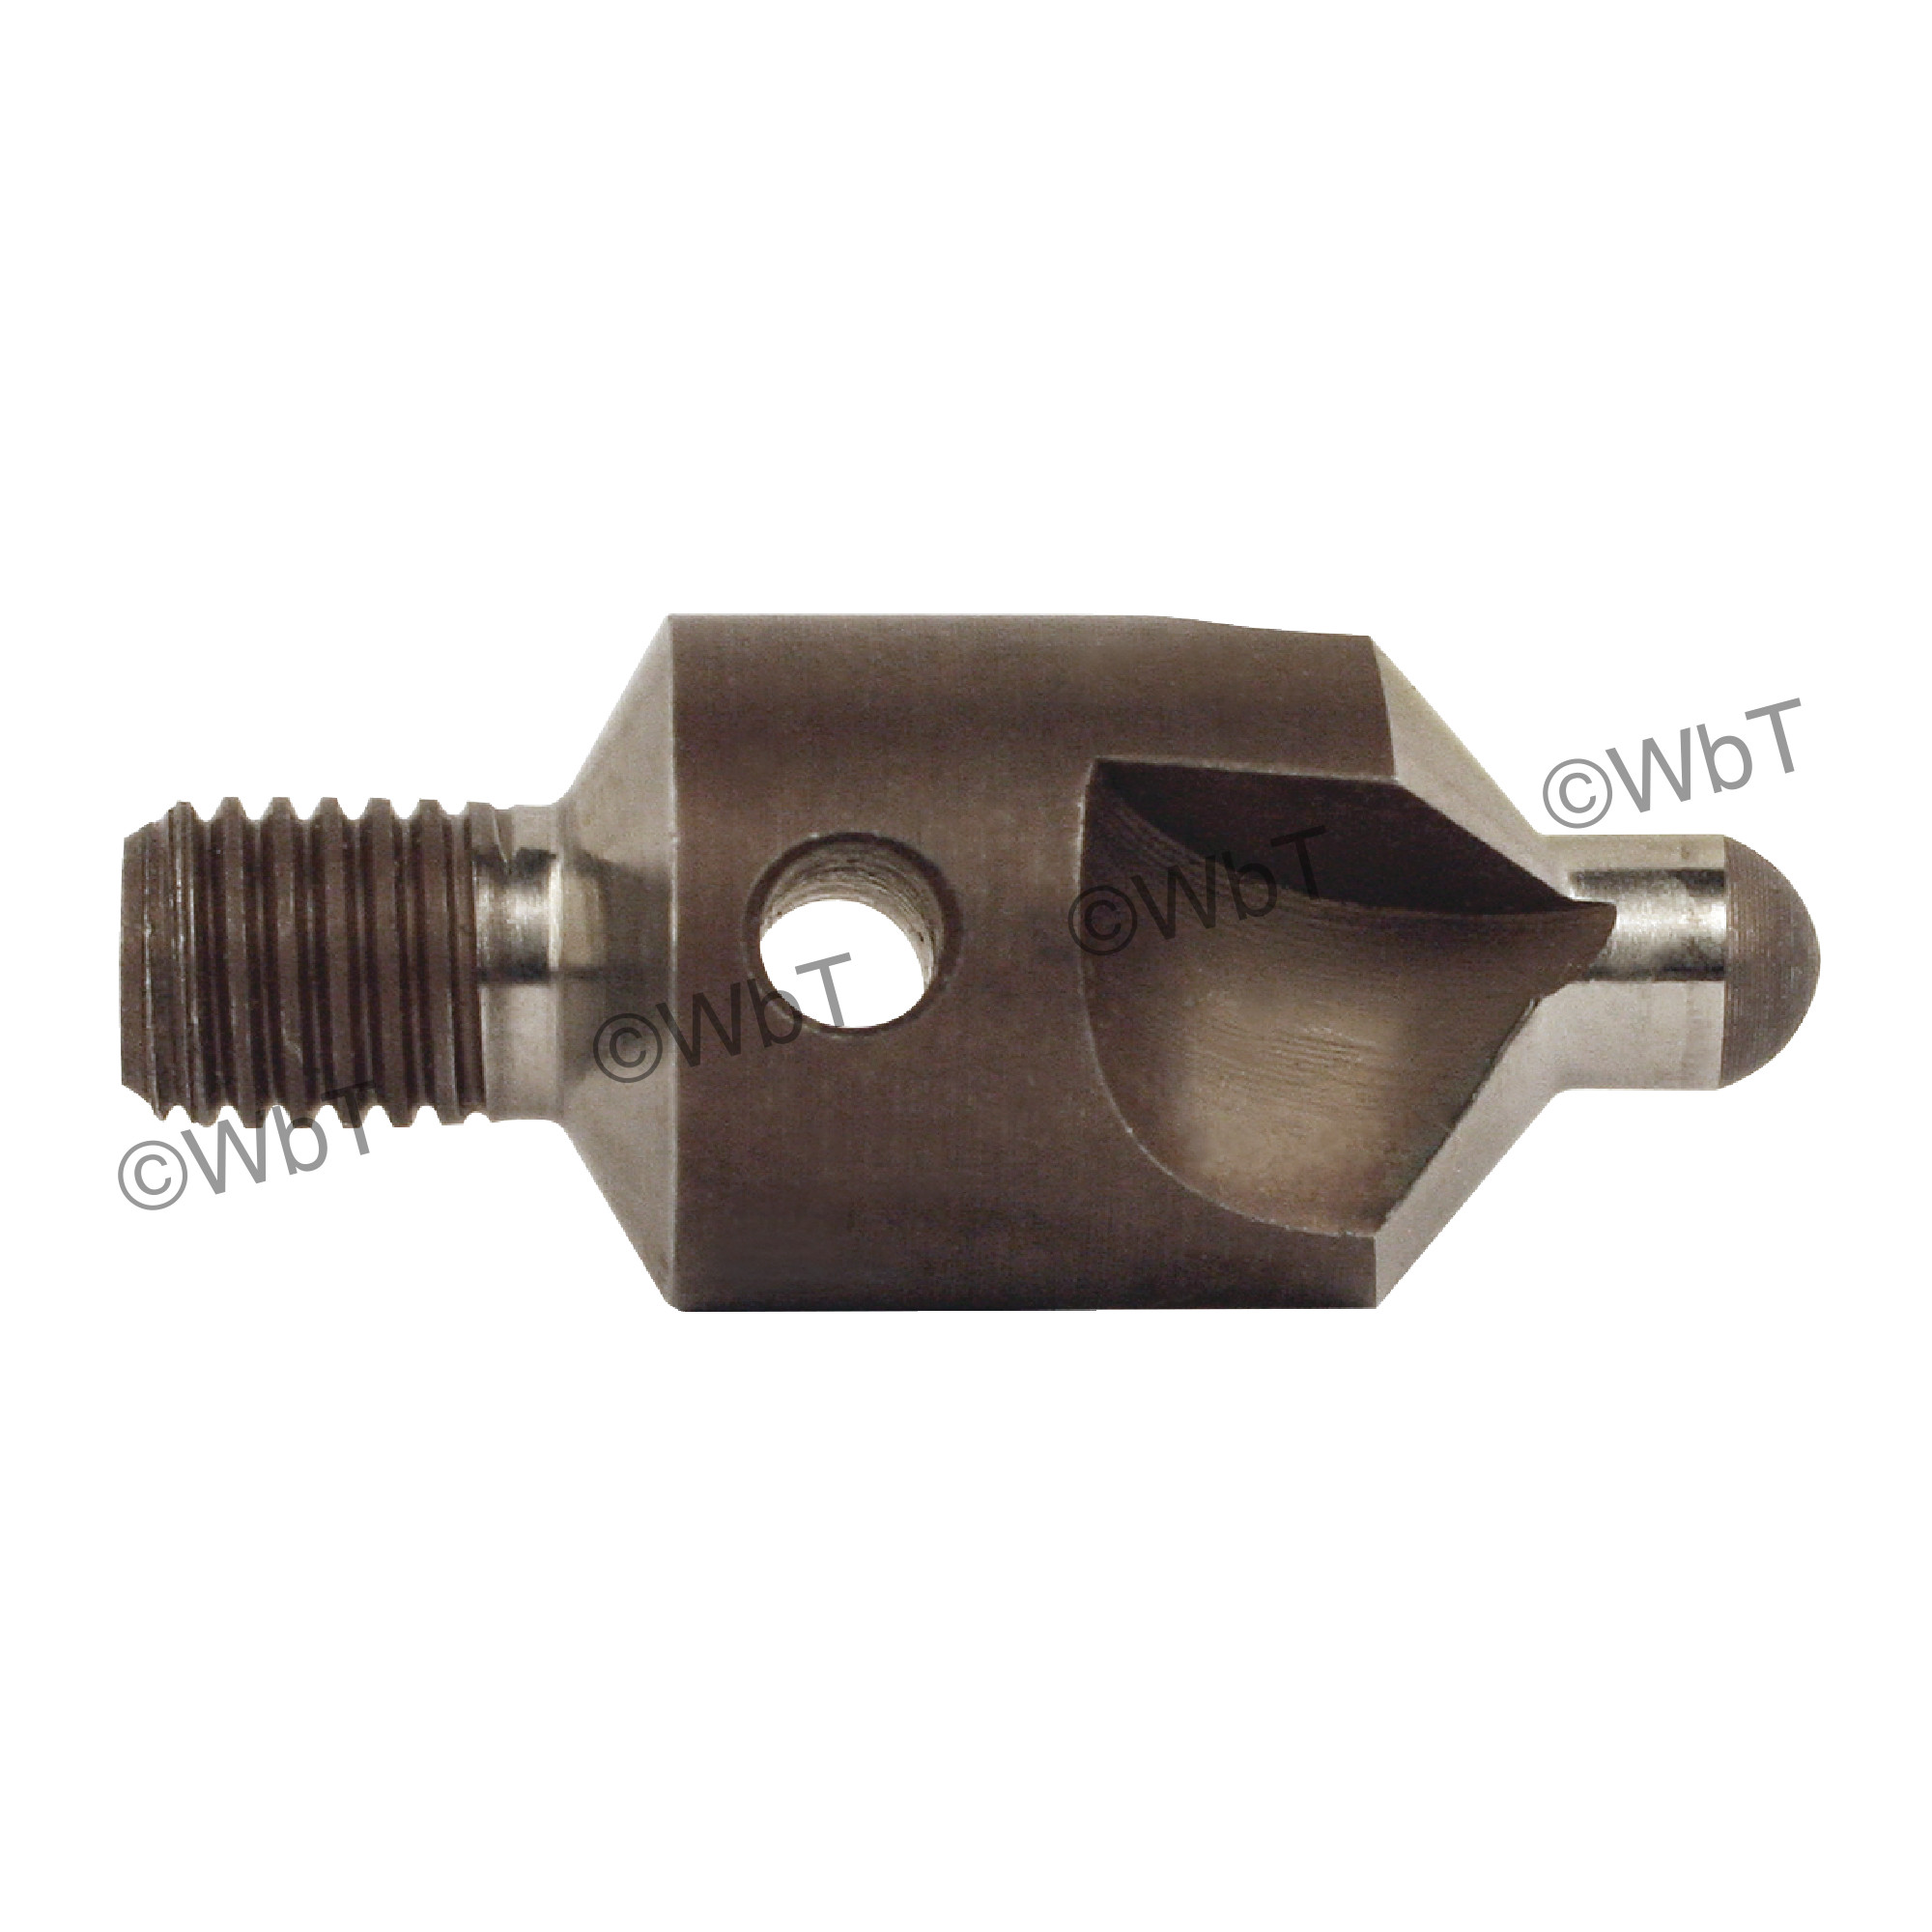 Threaded Shank 3 Flute Micro Stop Countersink